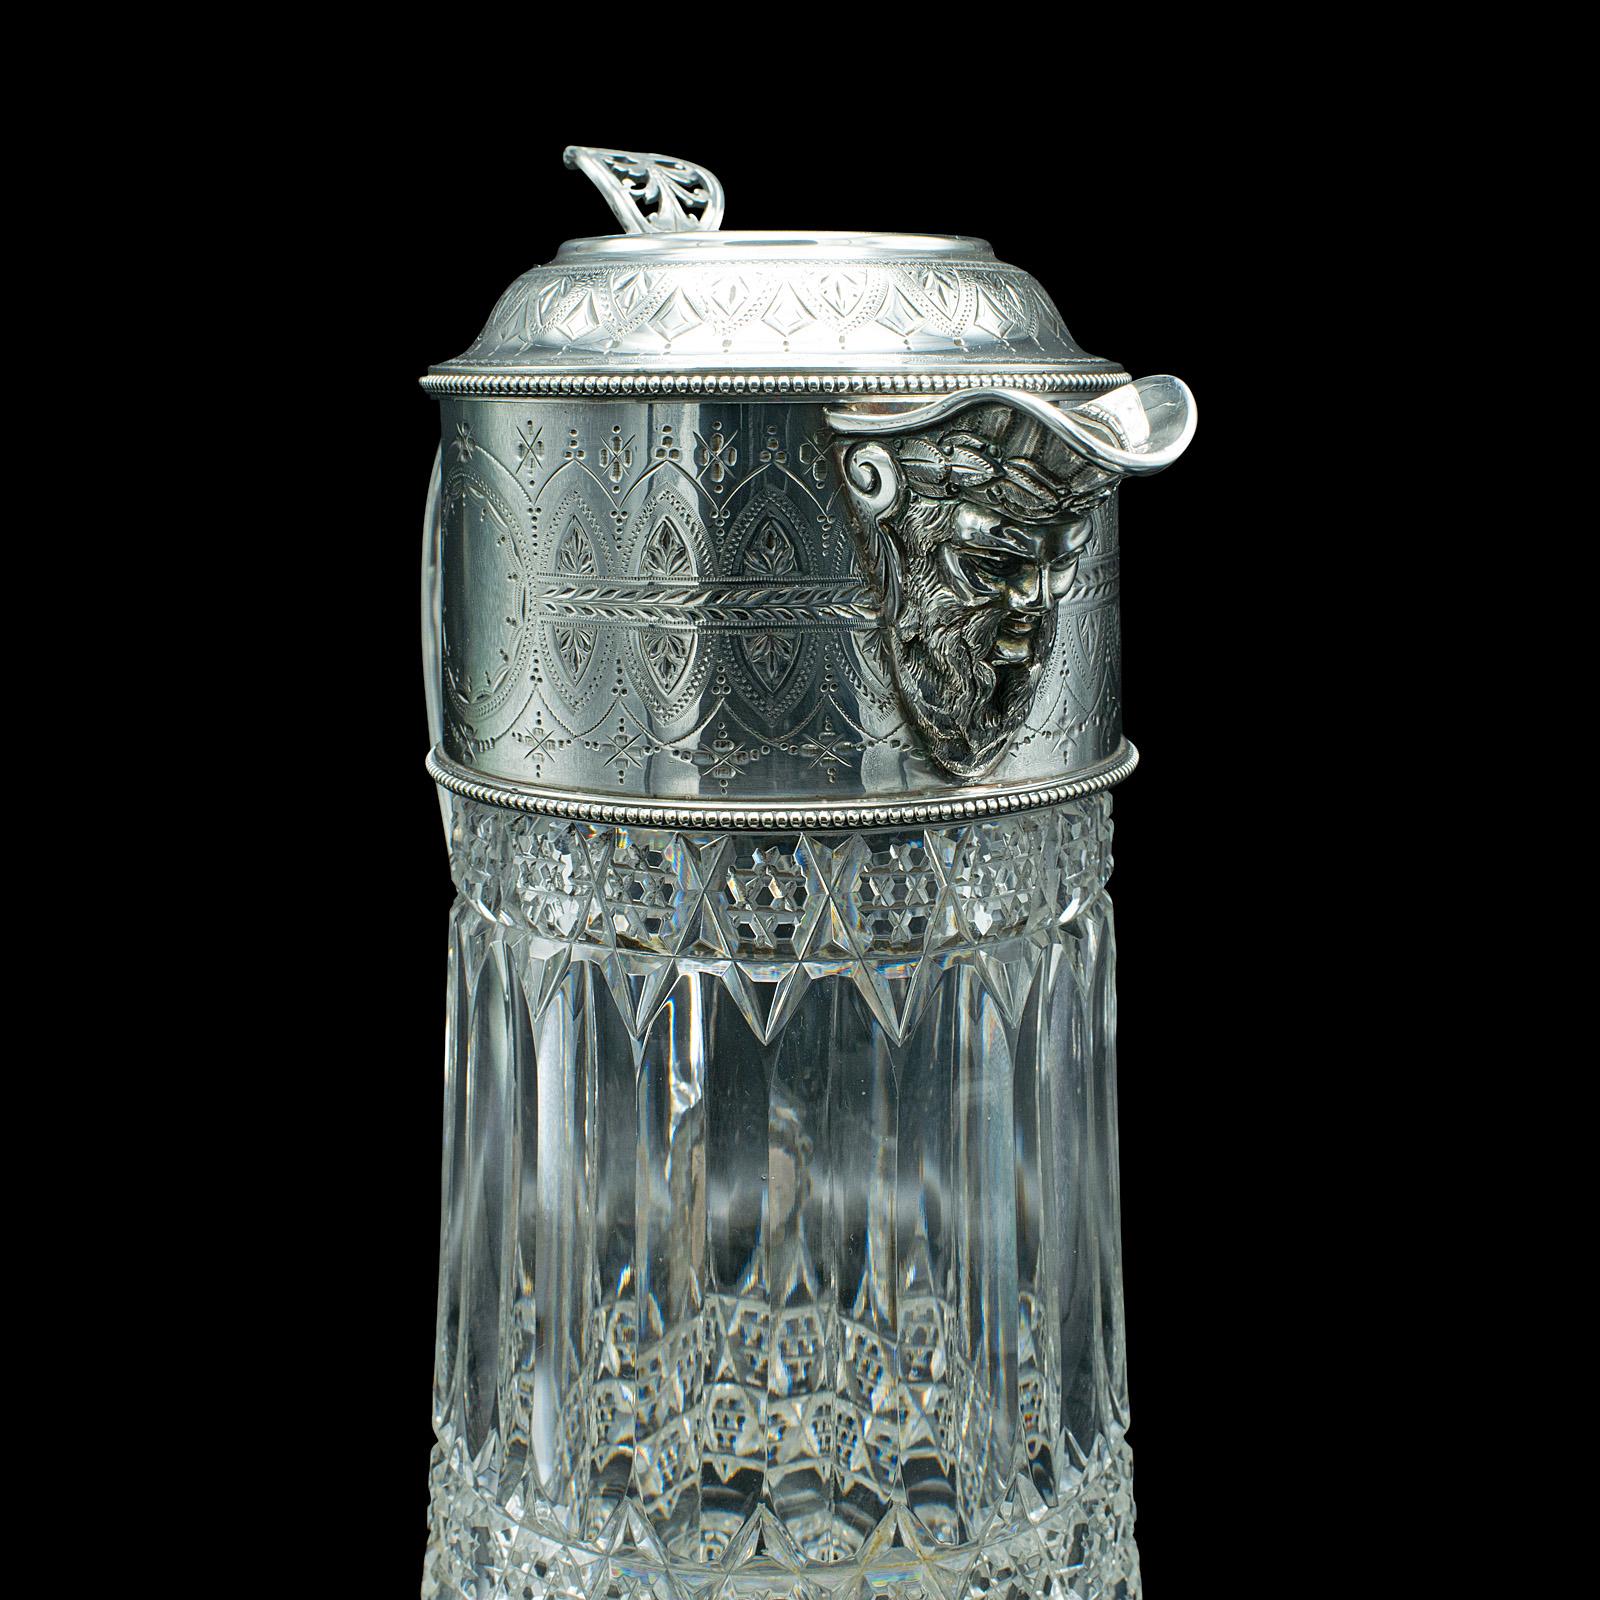 Antique Claret Jug, English, Cut Glass, Silver Plate, Decanter, Victorian, 1900 For Sale 2